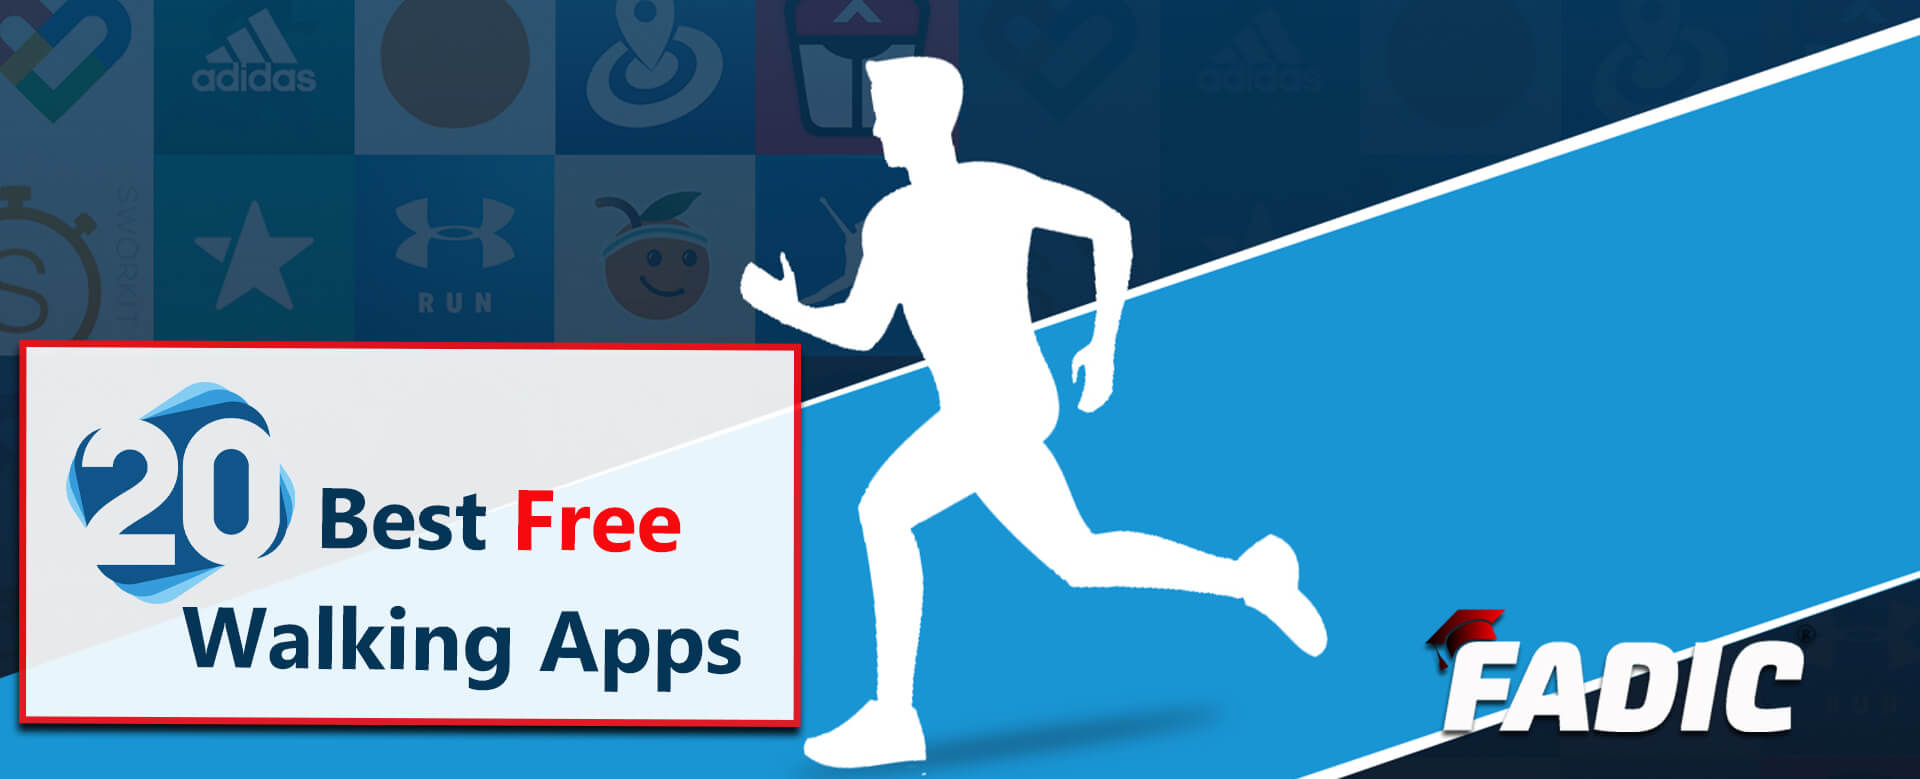 20 Best Free Walking Apps for Walkers Download from FADIC